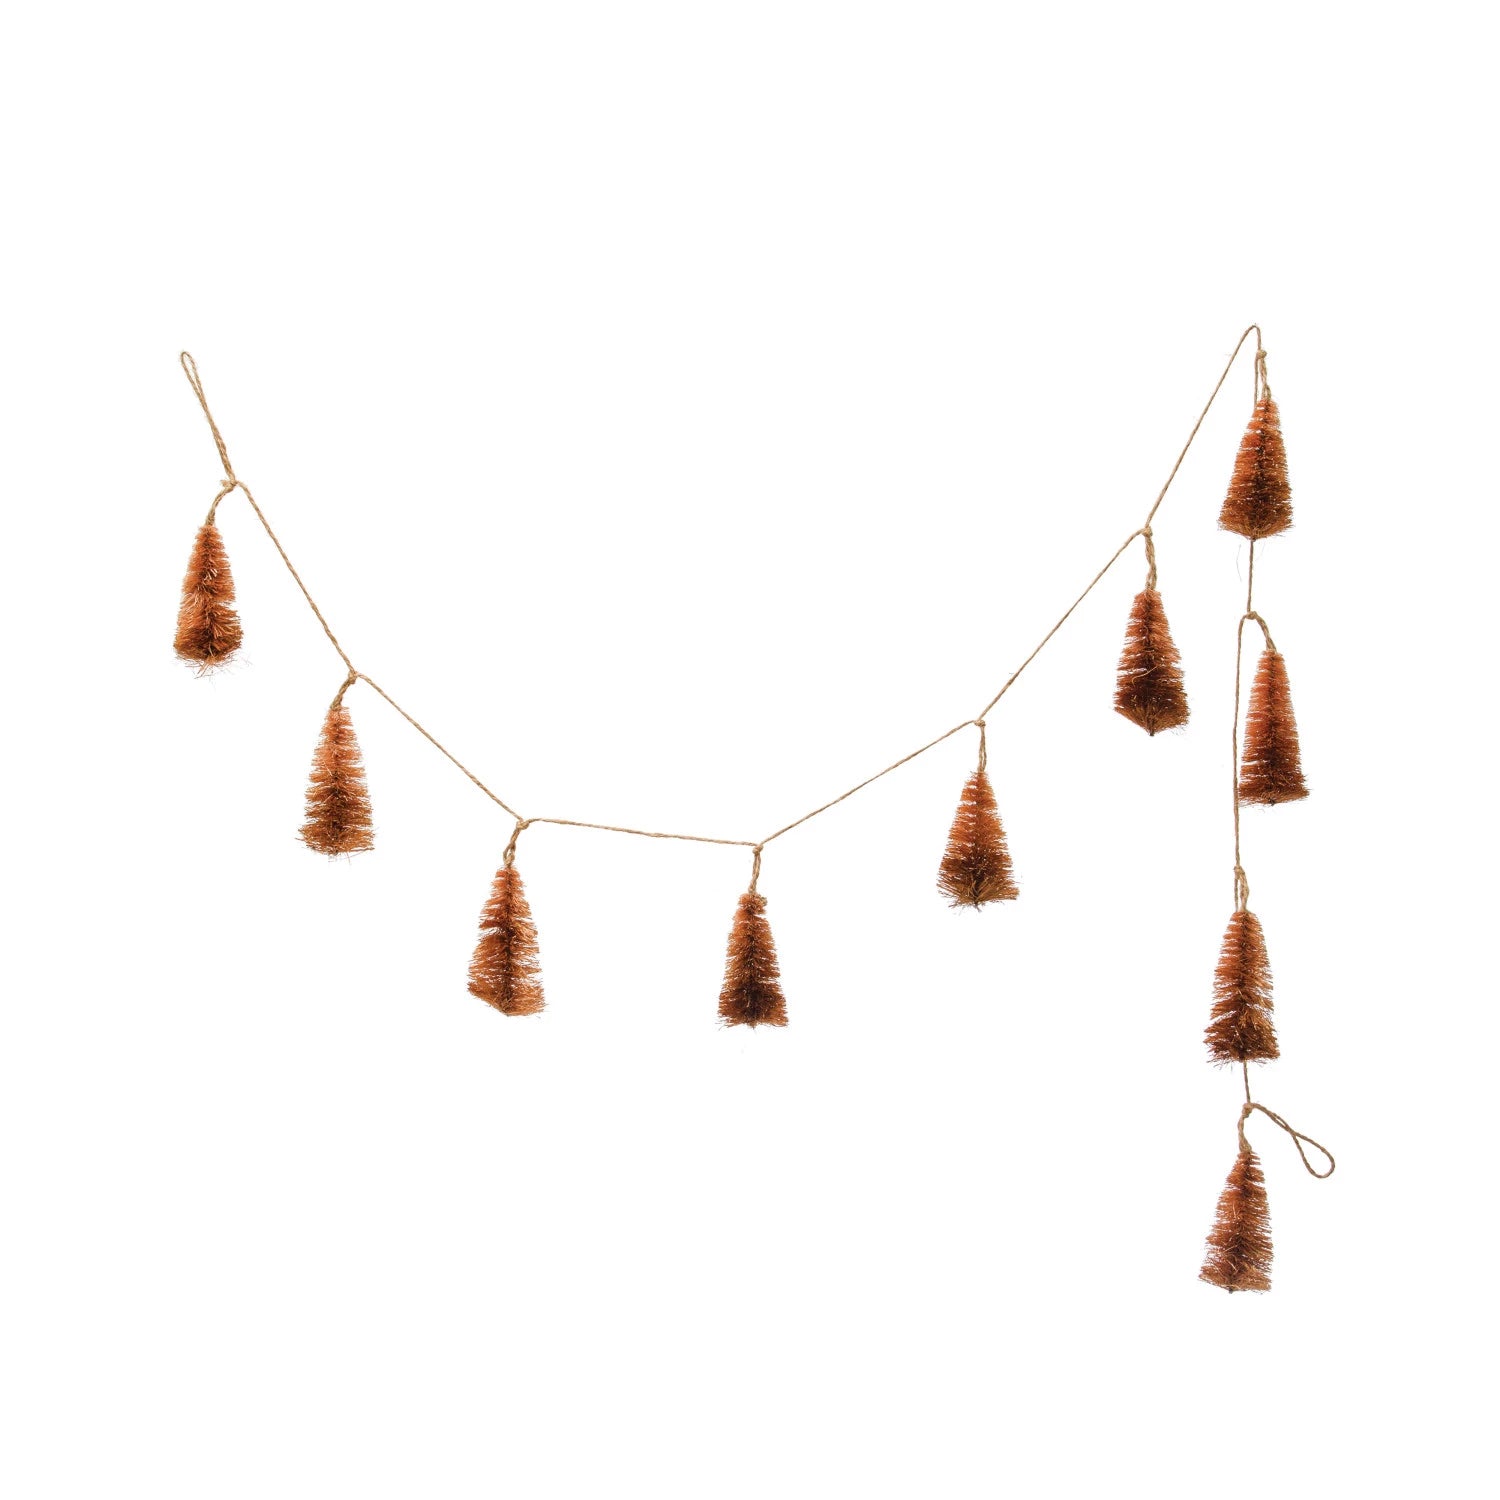 Sisal Bottle Brush Tree Garland with Jute Cord, Brown Ombré - 60"L